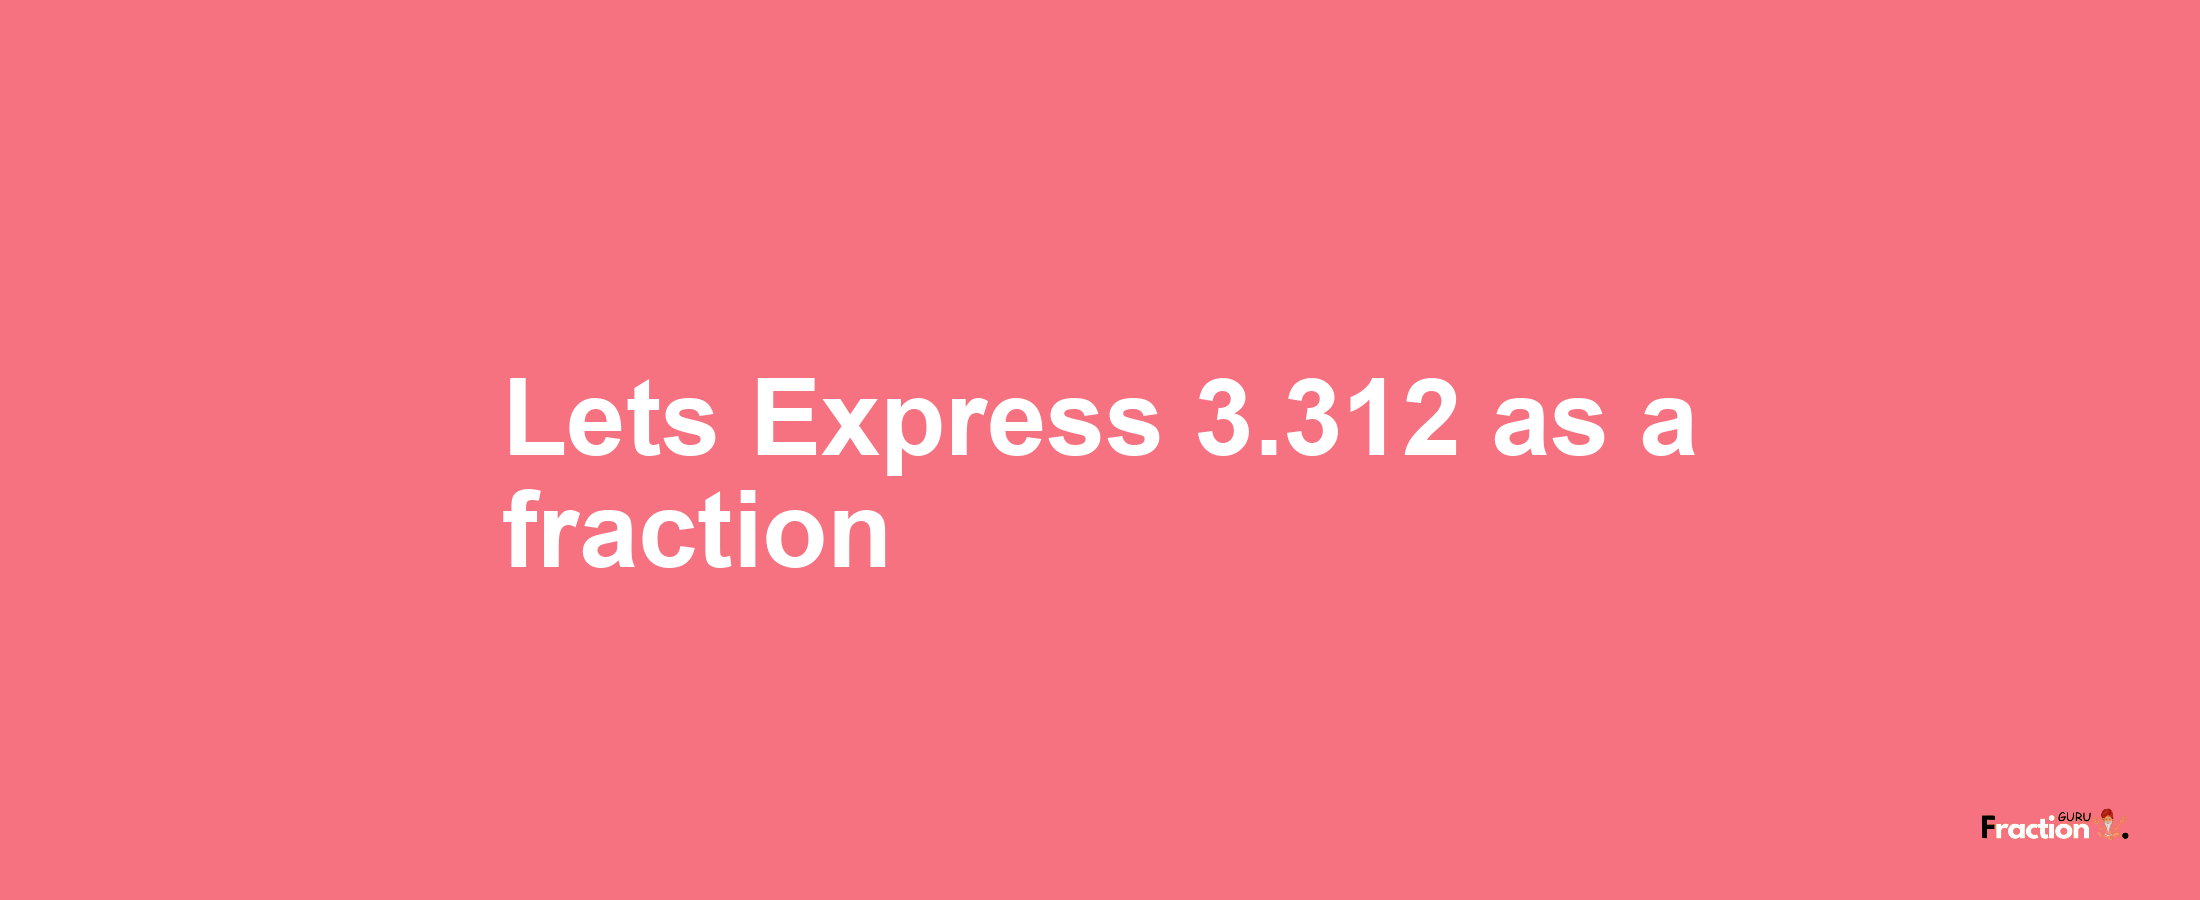 Lets Express 3.312 as afraction